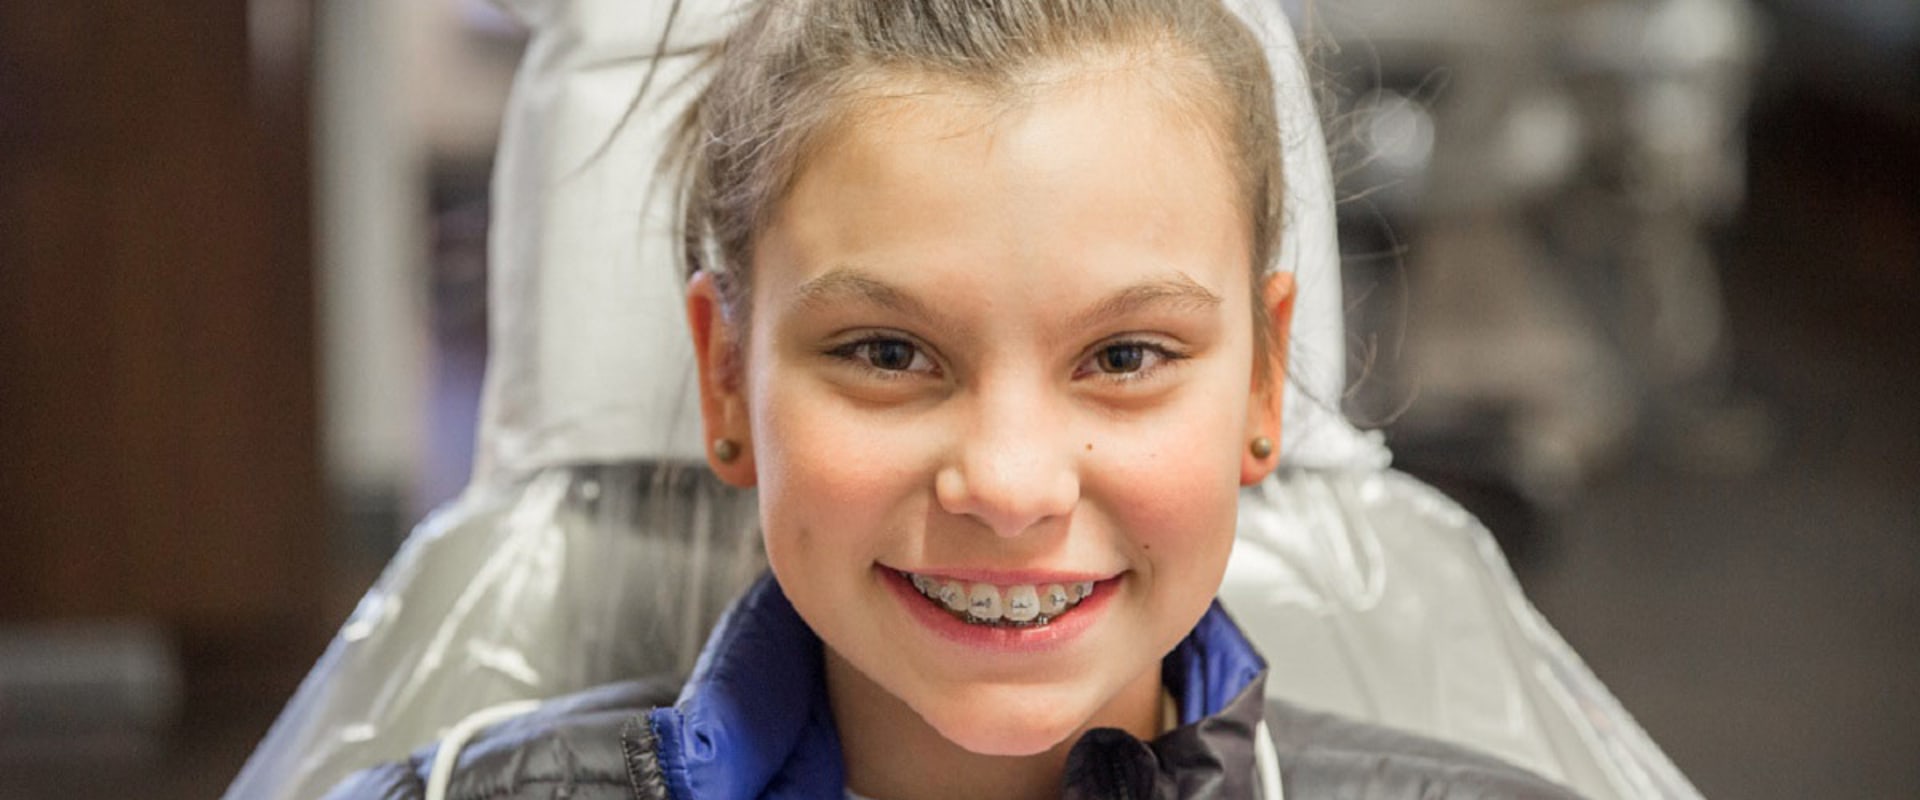 What Are the Benefits of Early Orthodontic Treatment for Children?